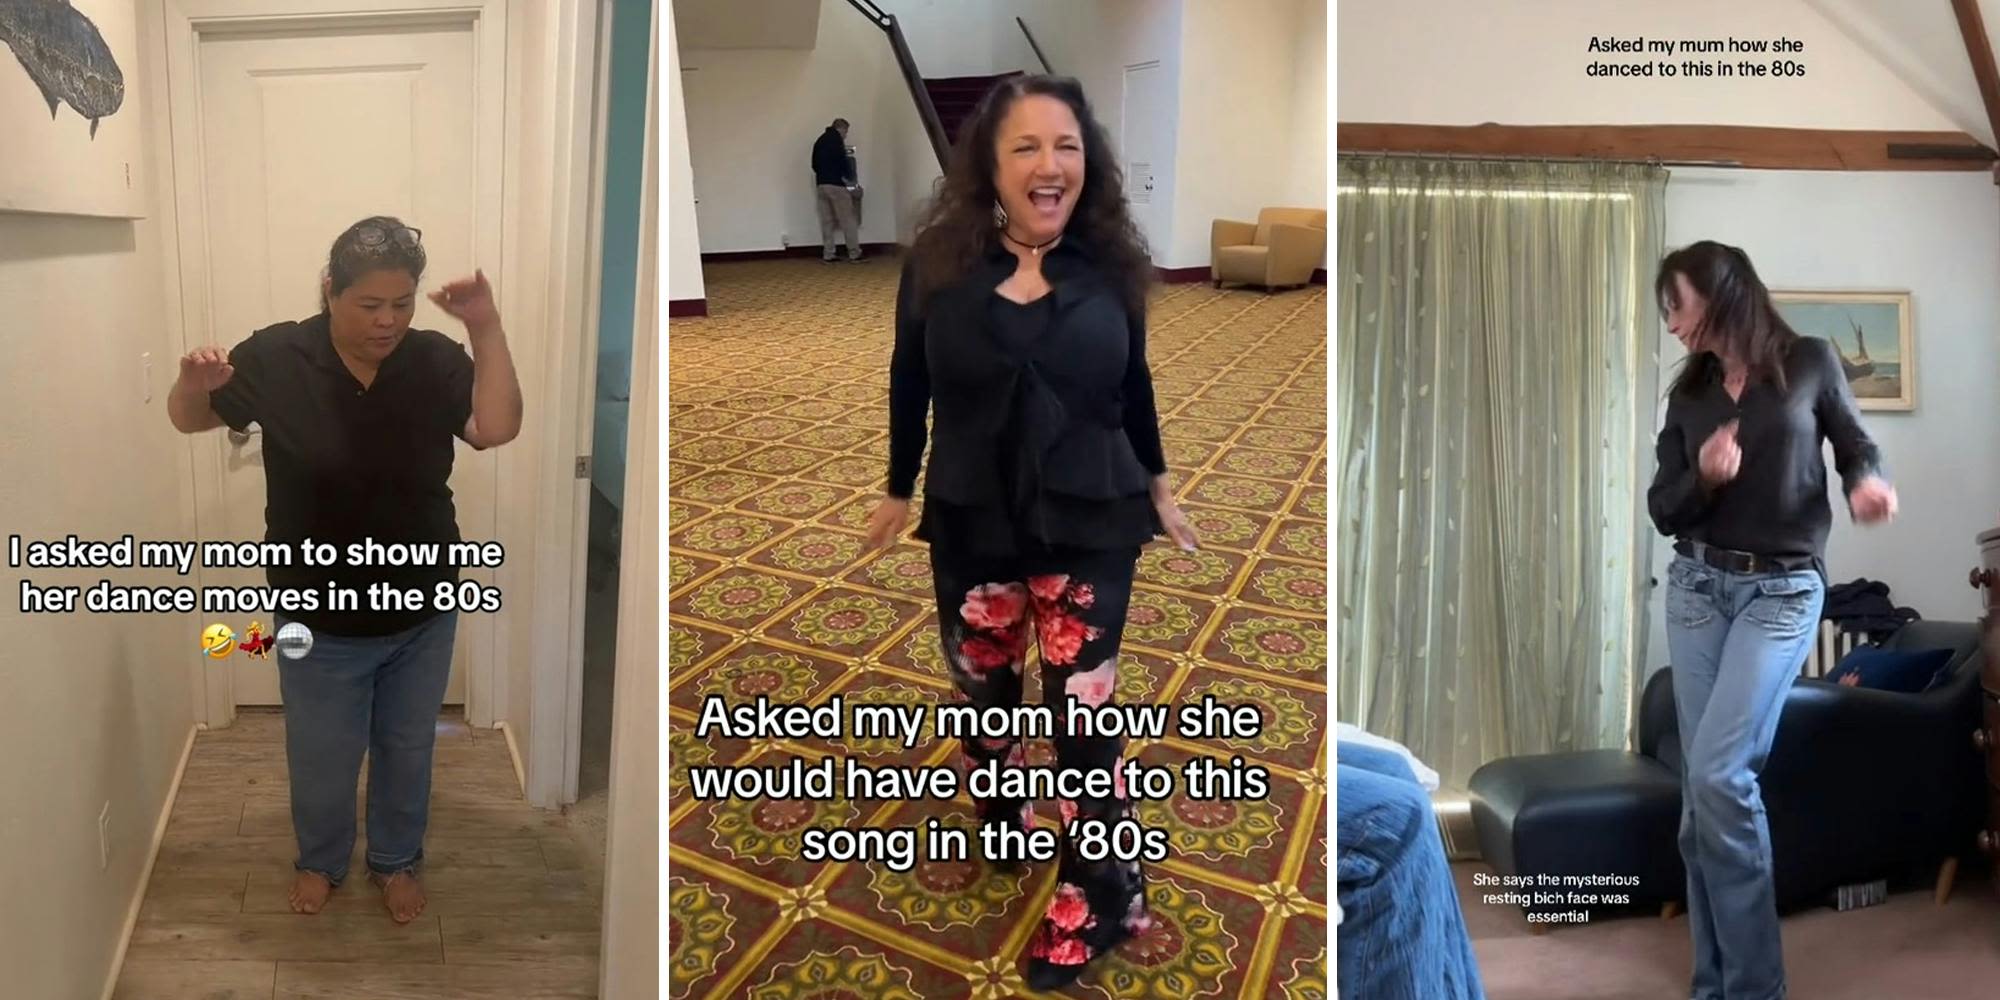 'They just vibe': TikTok’s moms are showcasing how they danced in the ‘80s